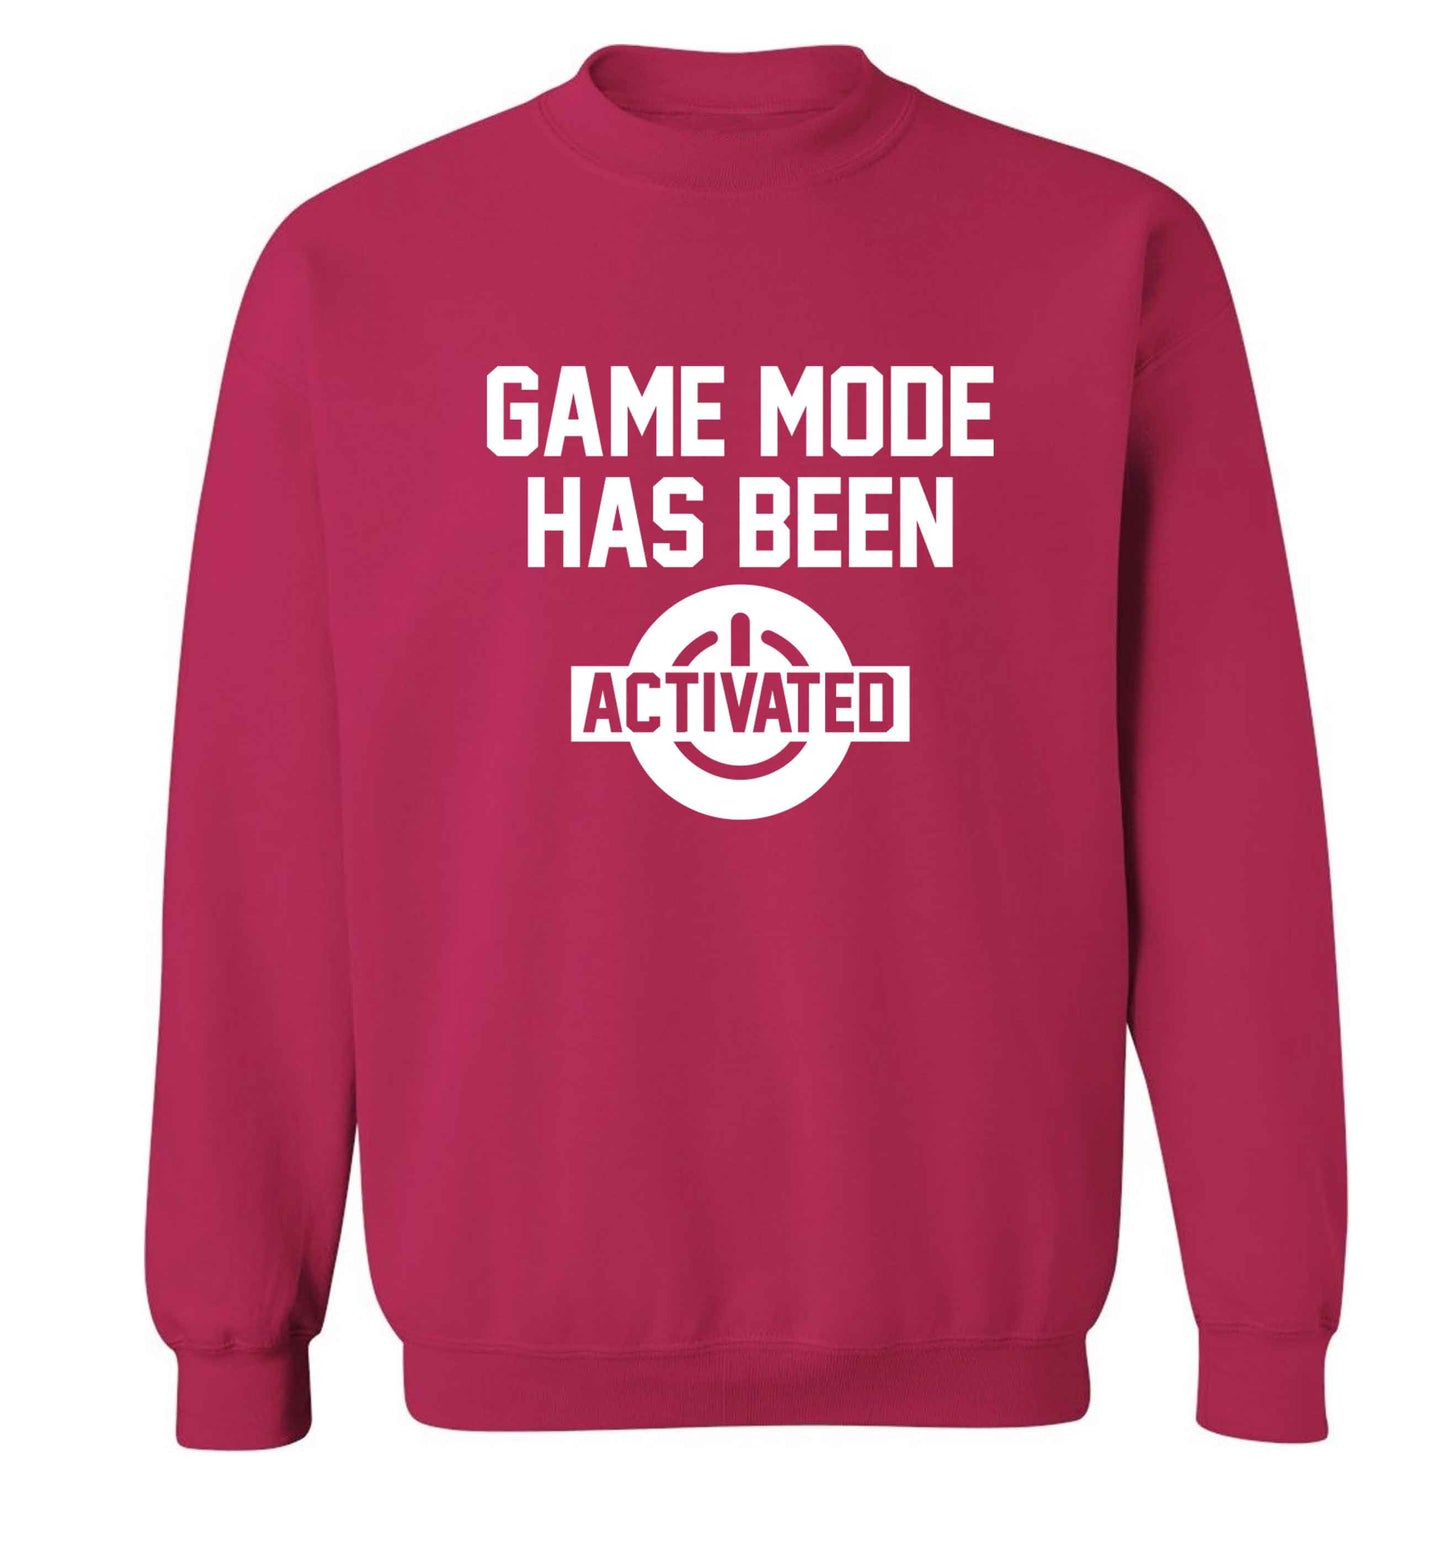 Game mode has been activated adult's unisex pink sweater 2XL